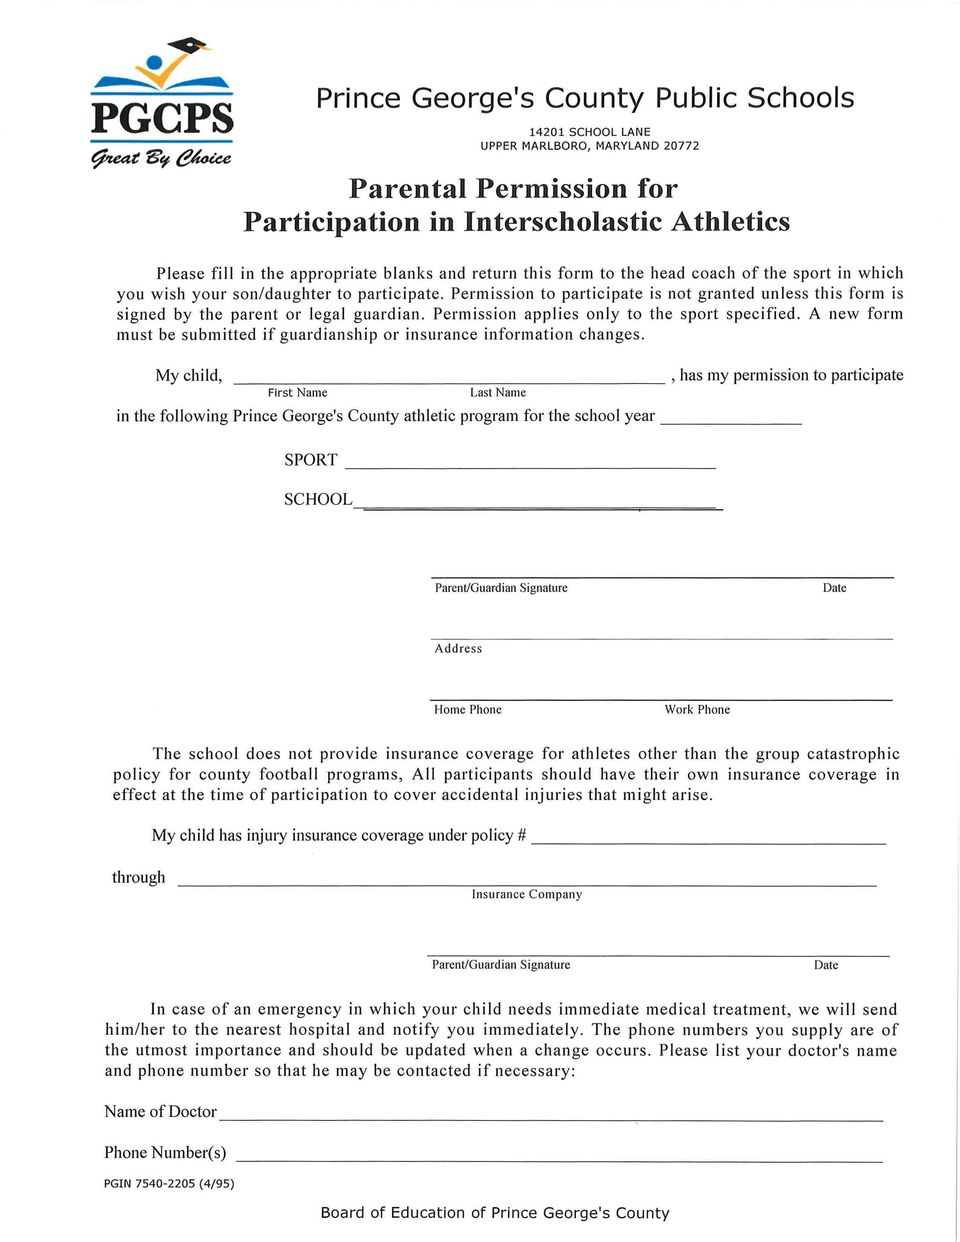 Permission to participate is not granted unless this form is signed by the parent or legal guardian. Permission applies only to the sport specified.